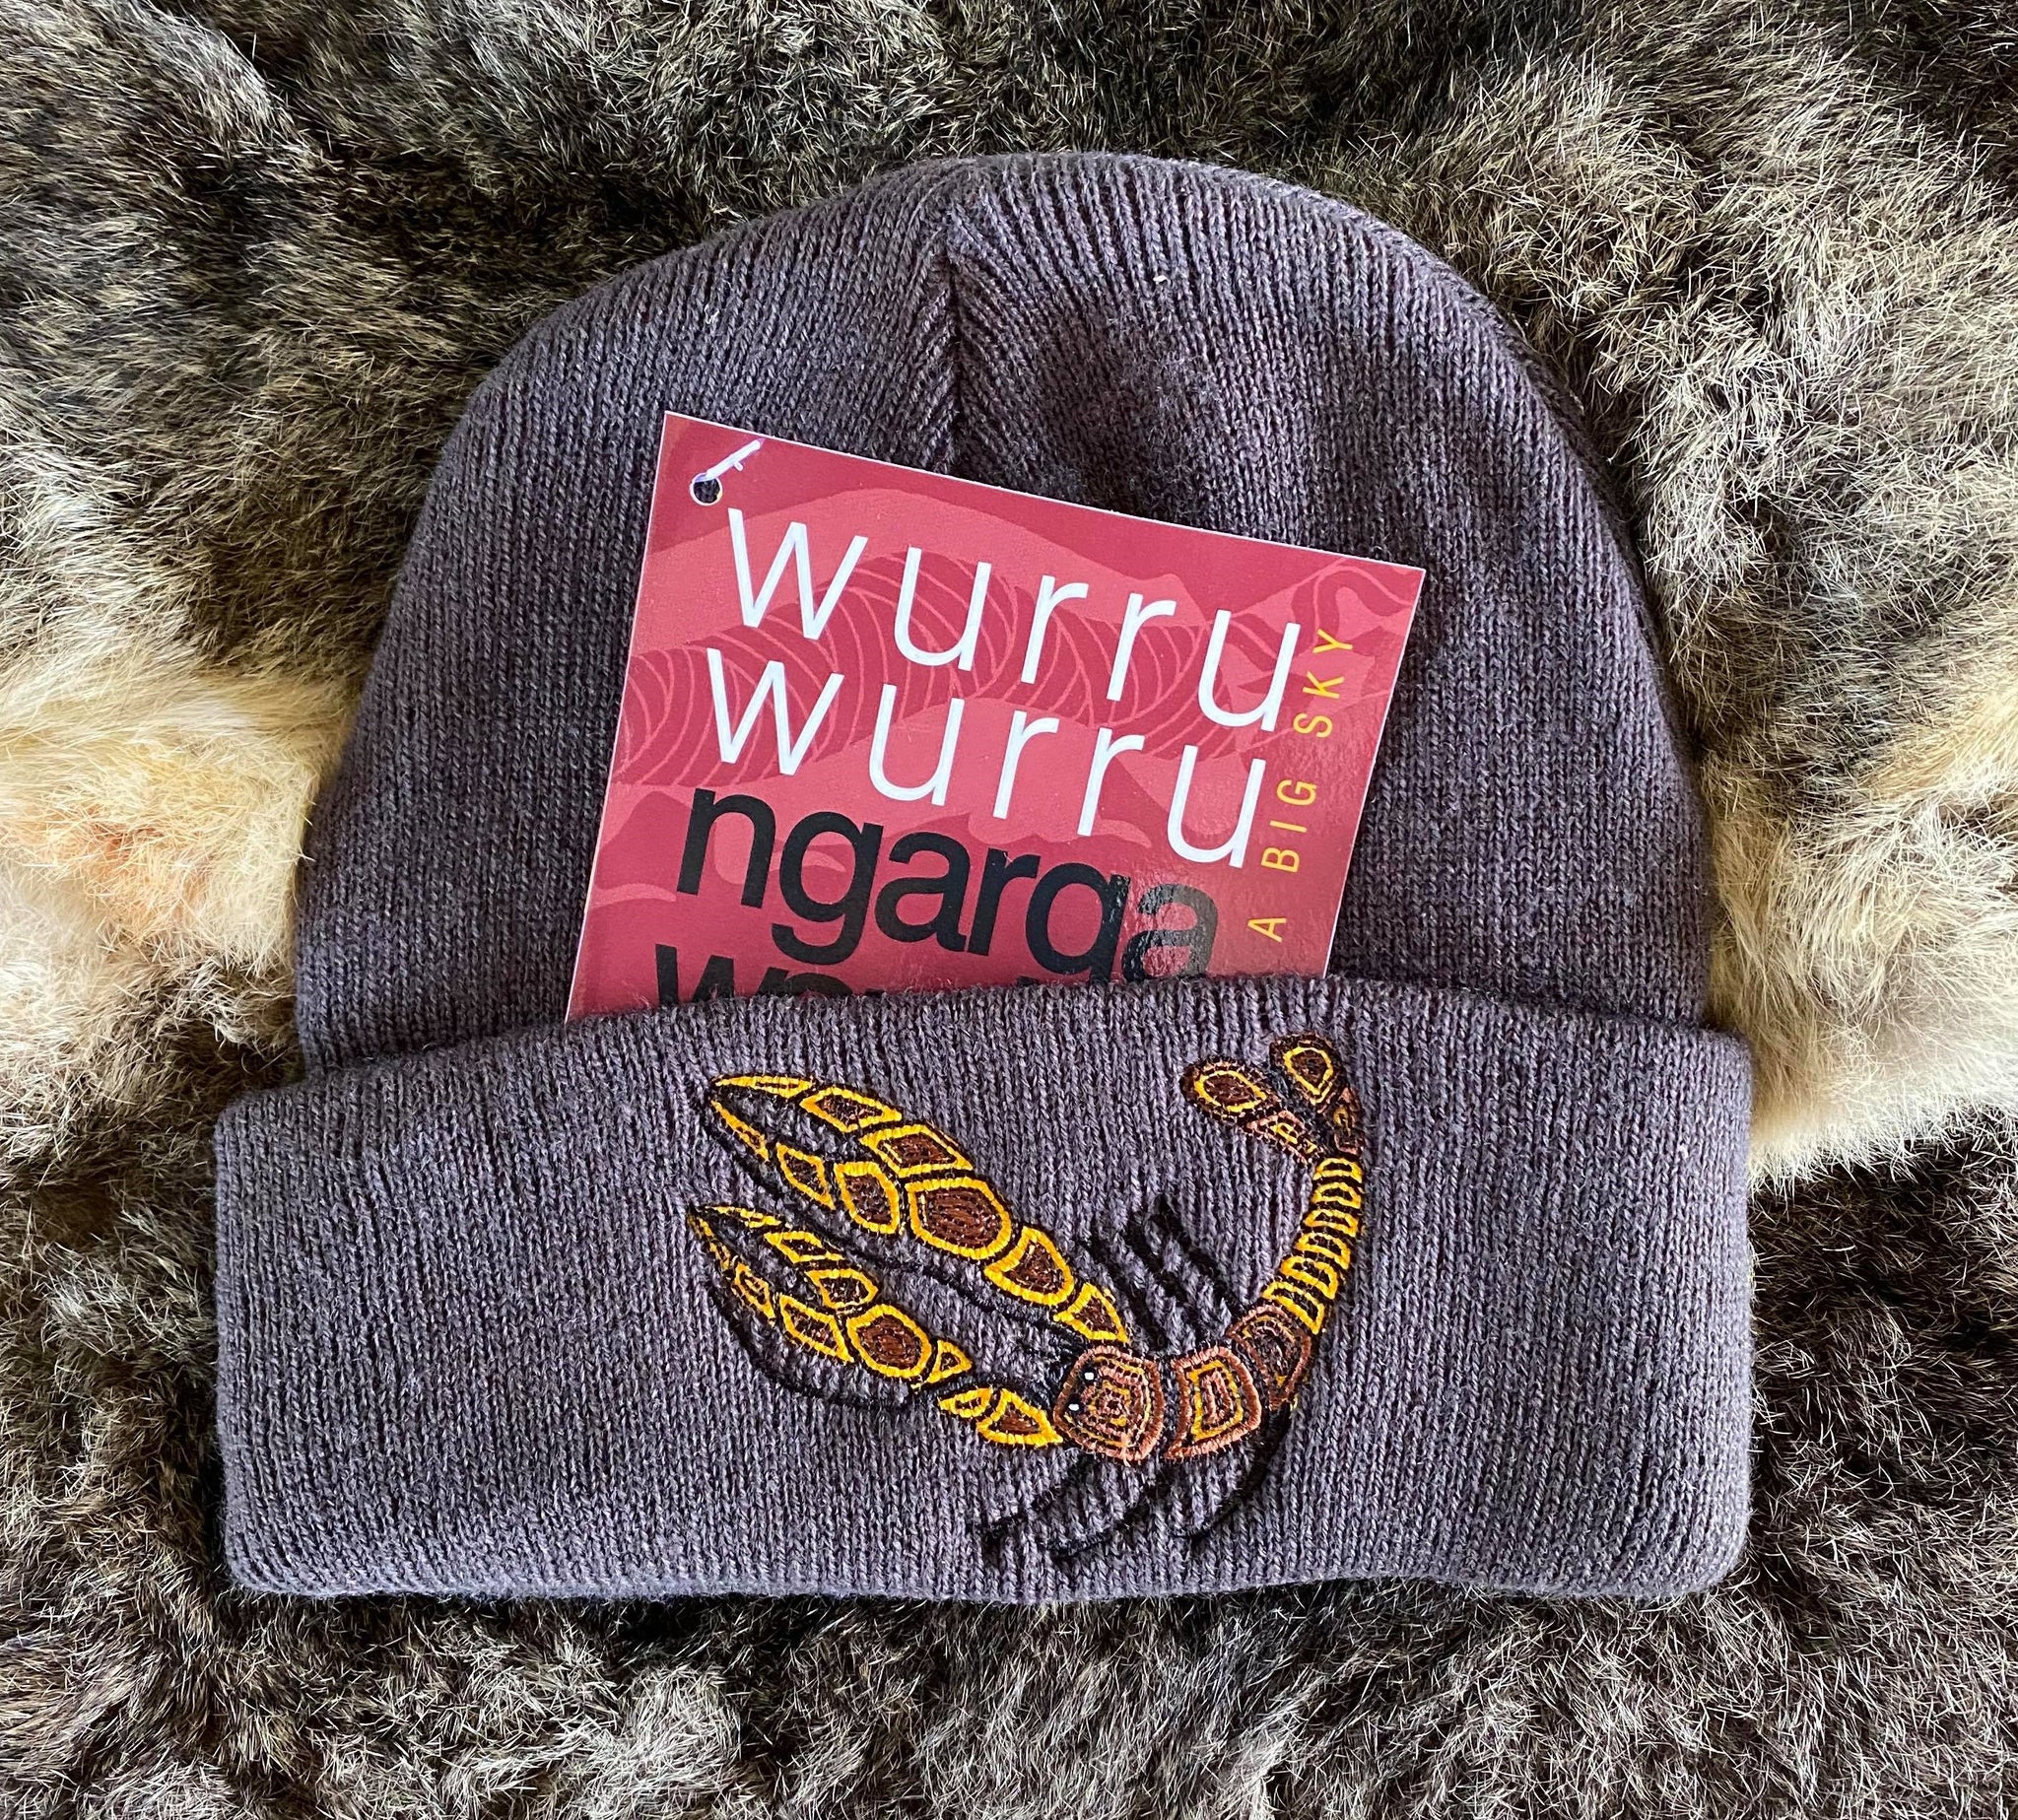 Ngarga Warendj Slate Grey Beanie with Embroidered Brown & Yellow Yabby Design   Bunggan Gulum the Yabby lives in wetlands, rivers, creeks, dams   and waterways. He builds his mud brick home for protection from   the elements and from predators.  He makes very good tucker   when boiled up.  